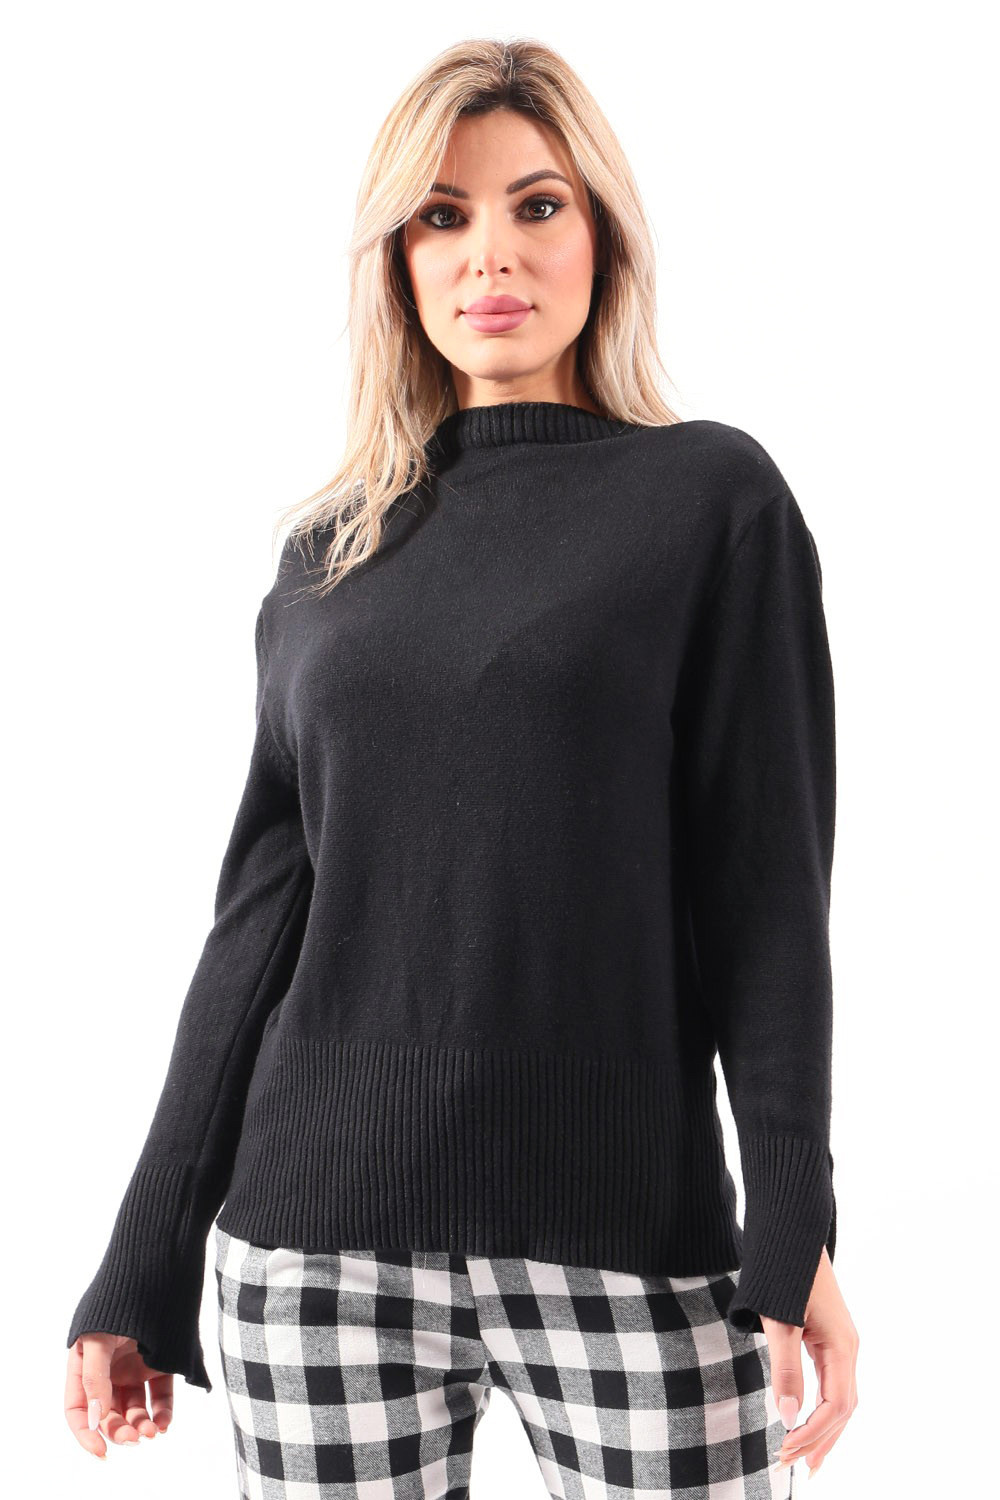 Black knit sweater - Sale of women's fashion clothes